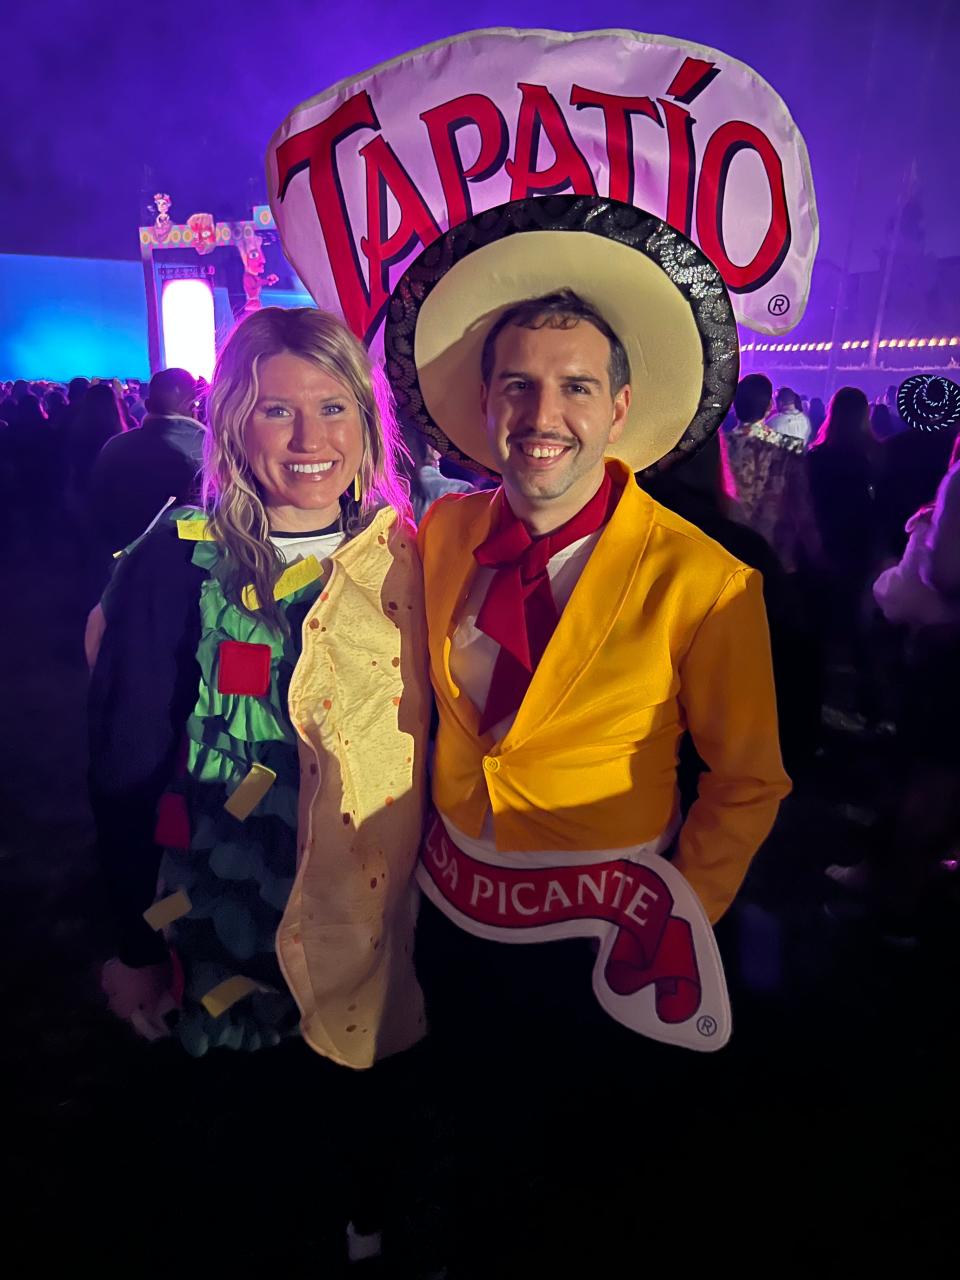 A couple dresses up as the Tapatio Hot Sauce and a taco at the Día de Los Muertos celebration at the Hollywood Forever Cemetery in Los Angeles on Saturday, Oct. 28, 2023.